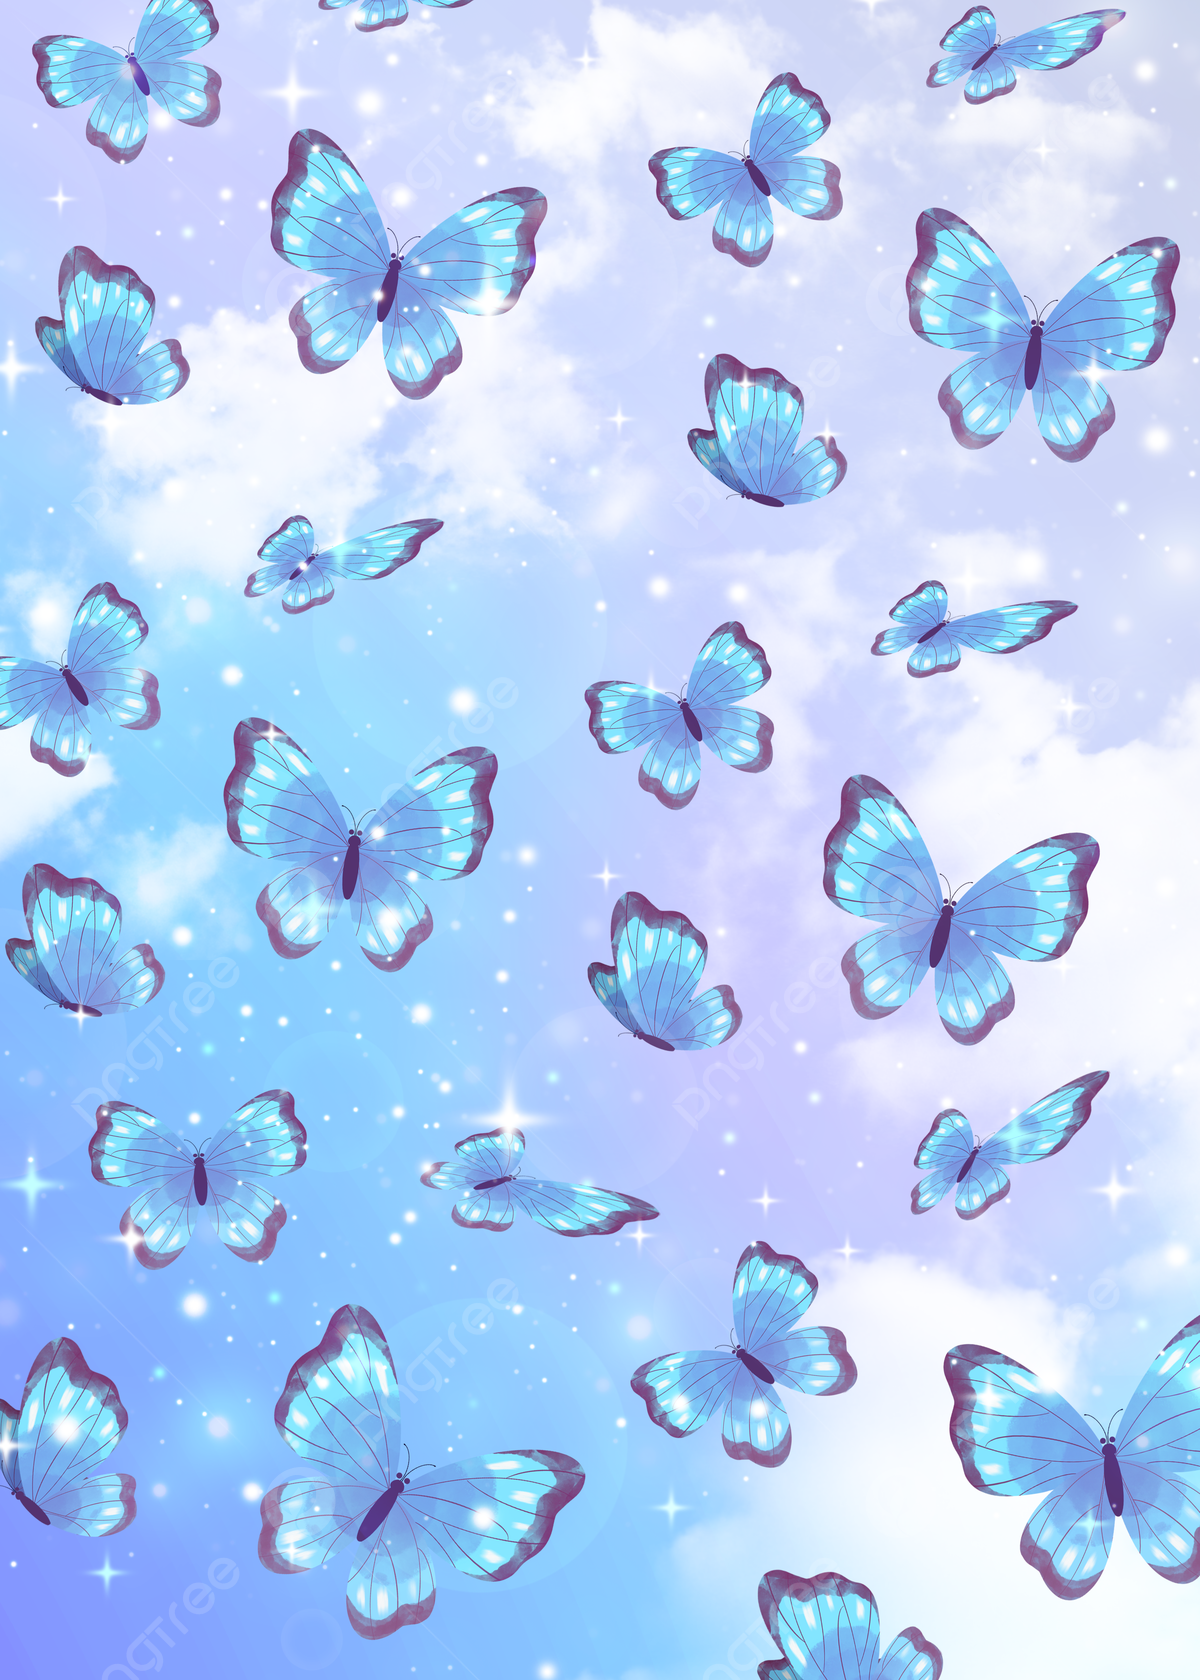 Blue Butterfly Texture Light Effect Colorful Butterfly Background Wallpaper Image For Free Download